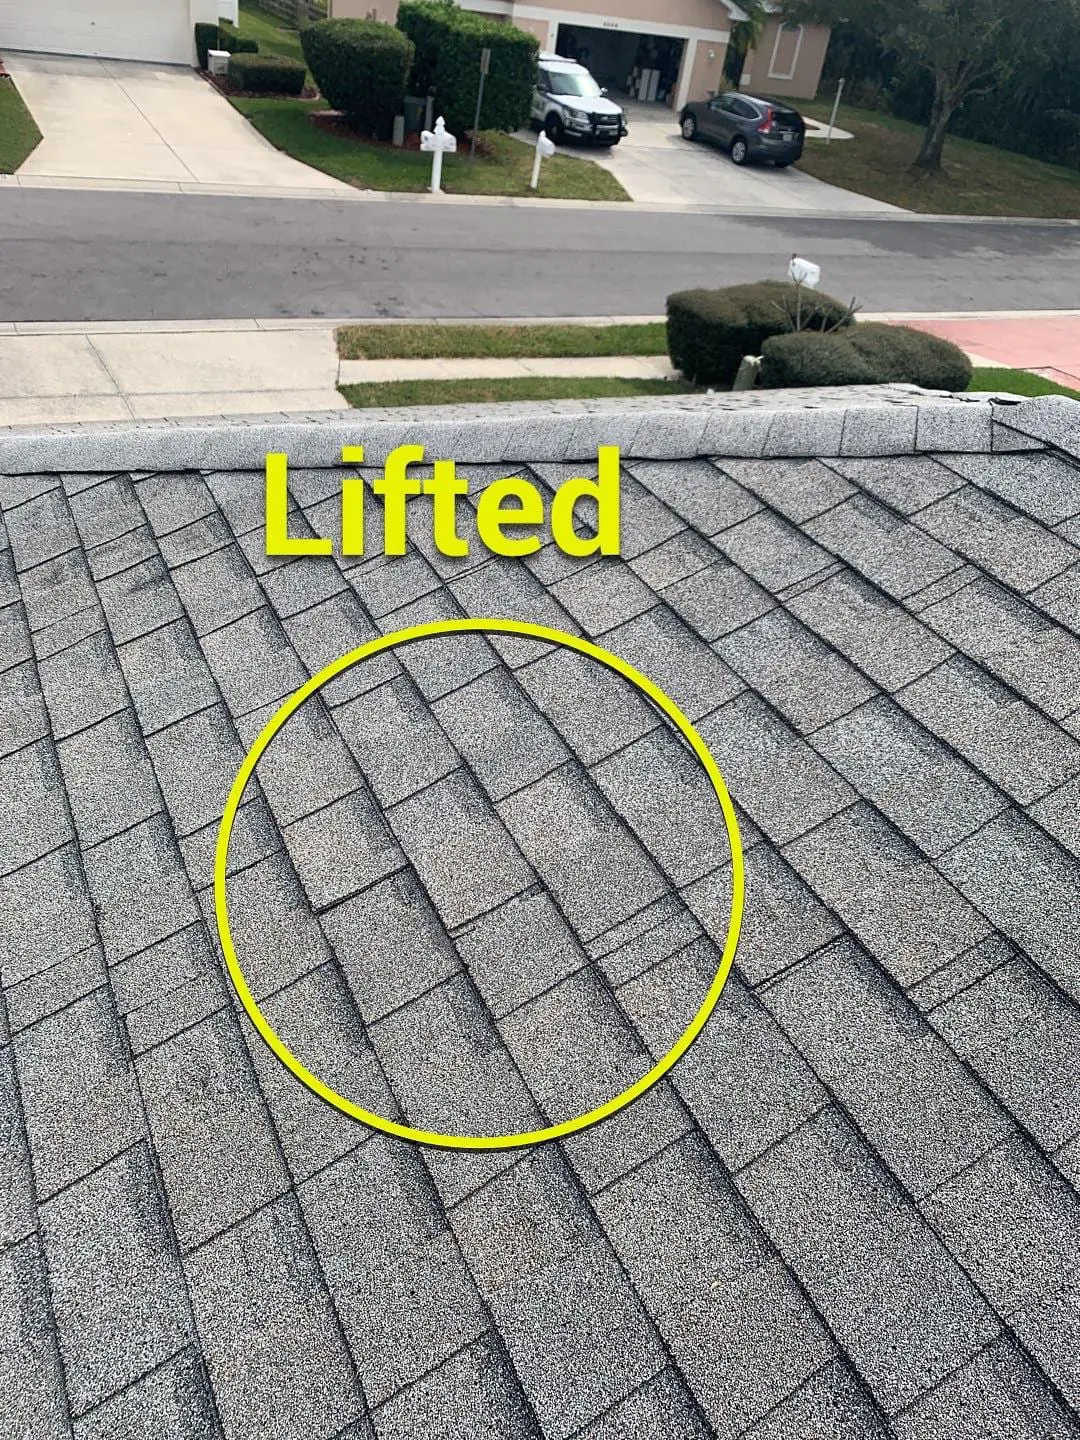 Got Wind Damage To Roof? Your Insurance May Cover It!